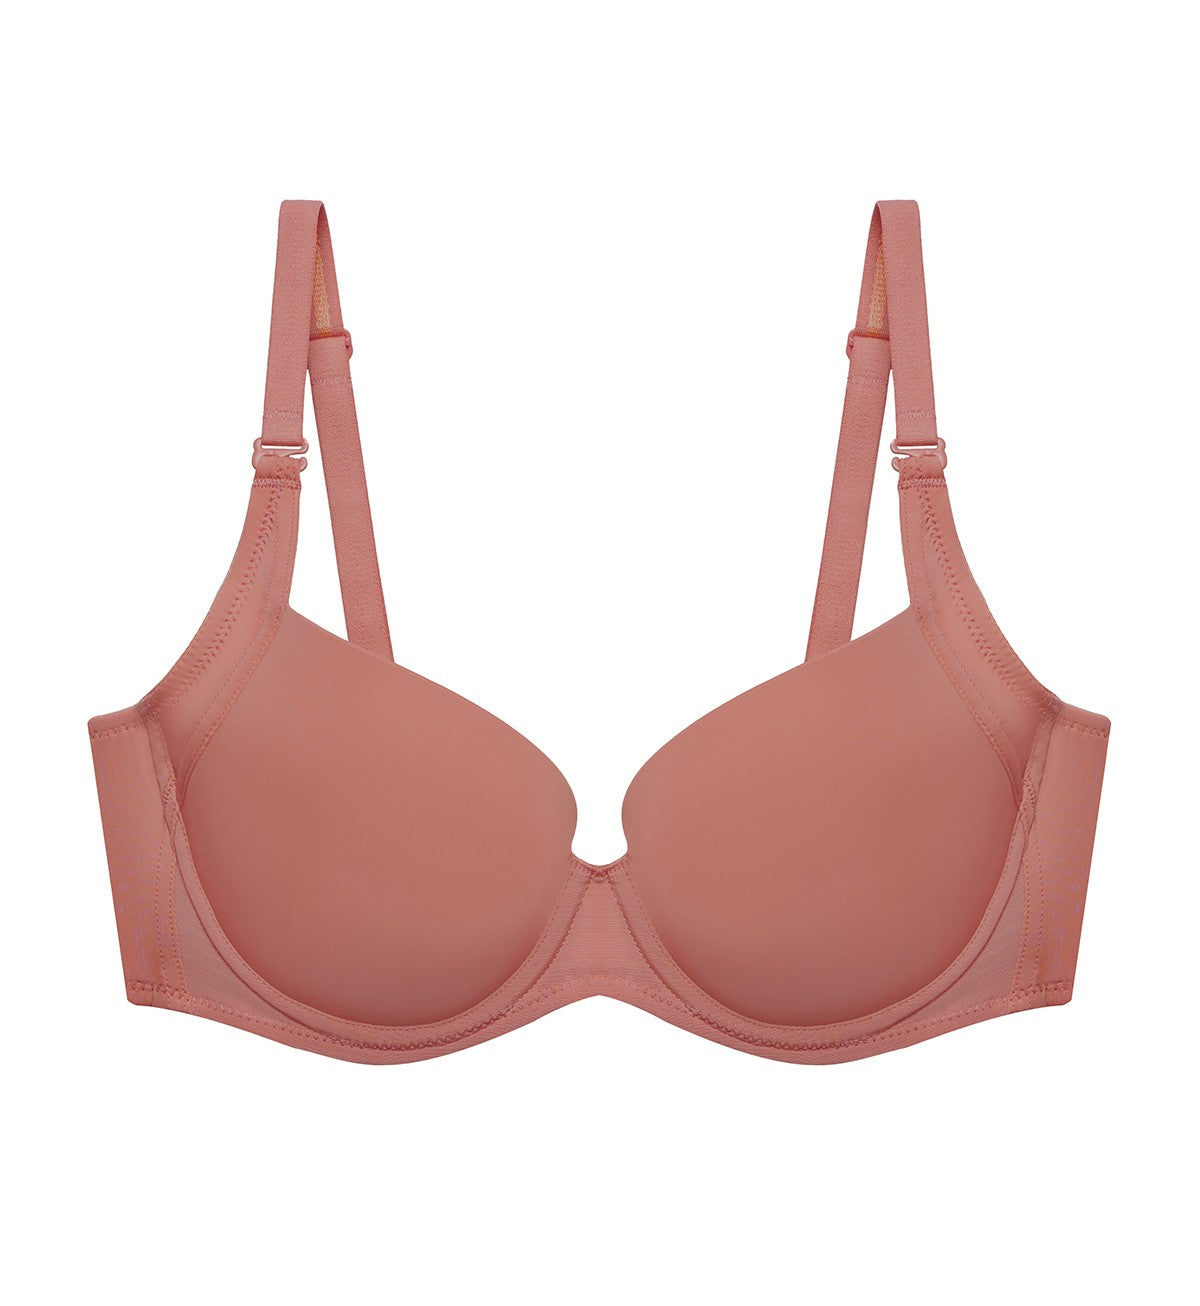 https://cdn.shopify.com/s/files/1/0228/3854/2413/products/Invisible-Inside-Out-Wired-Padded-Bra-Brown-10210426-00EV-PR-v1.jpg?v=1708419752